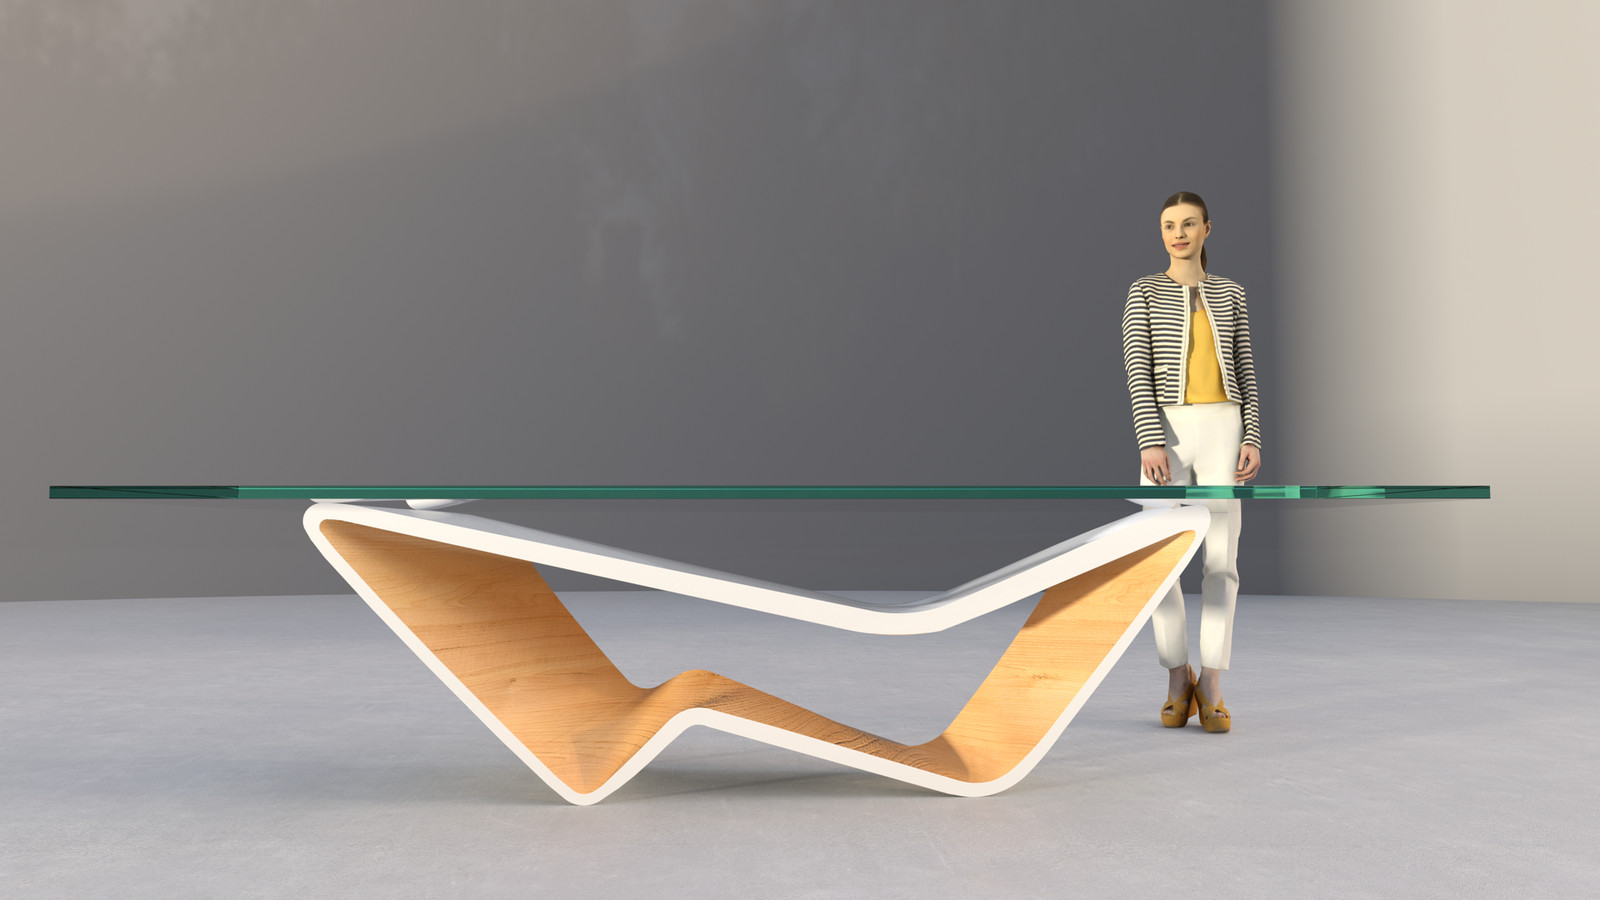 SketchUp + Thea Render 
Wilmer Chaca Table-Scene 7B

Table construction video here: https://www.facebook.com/Kemp.Productions/videos/1211294868916088/ 